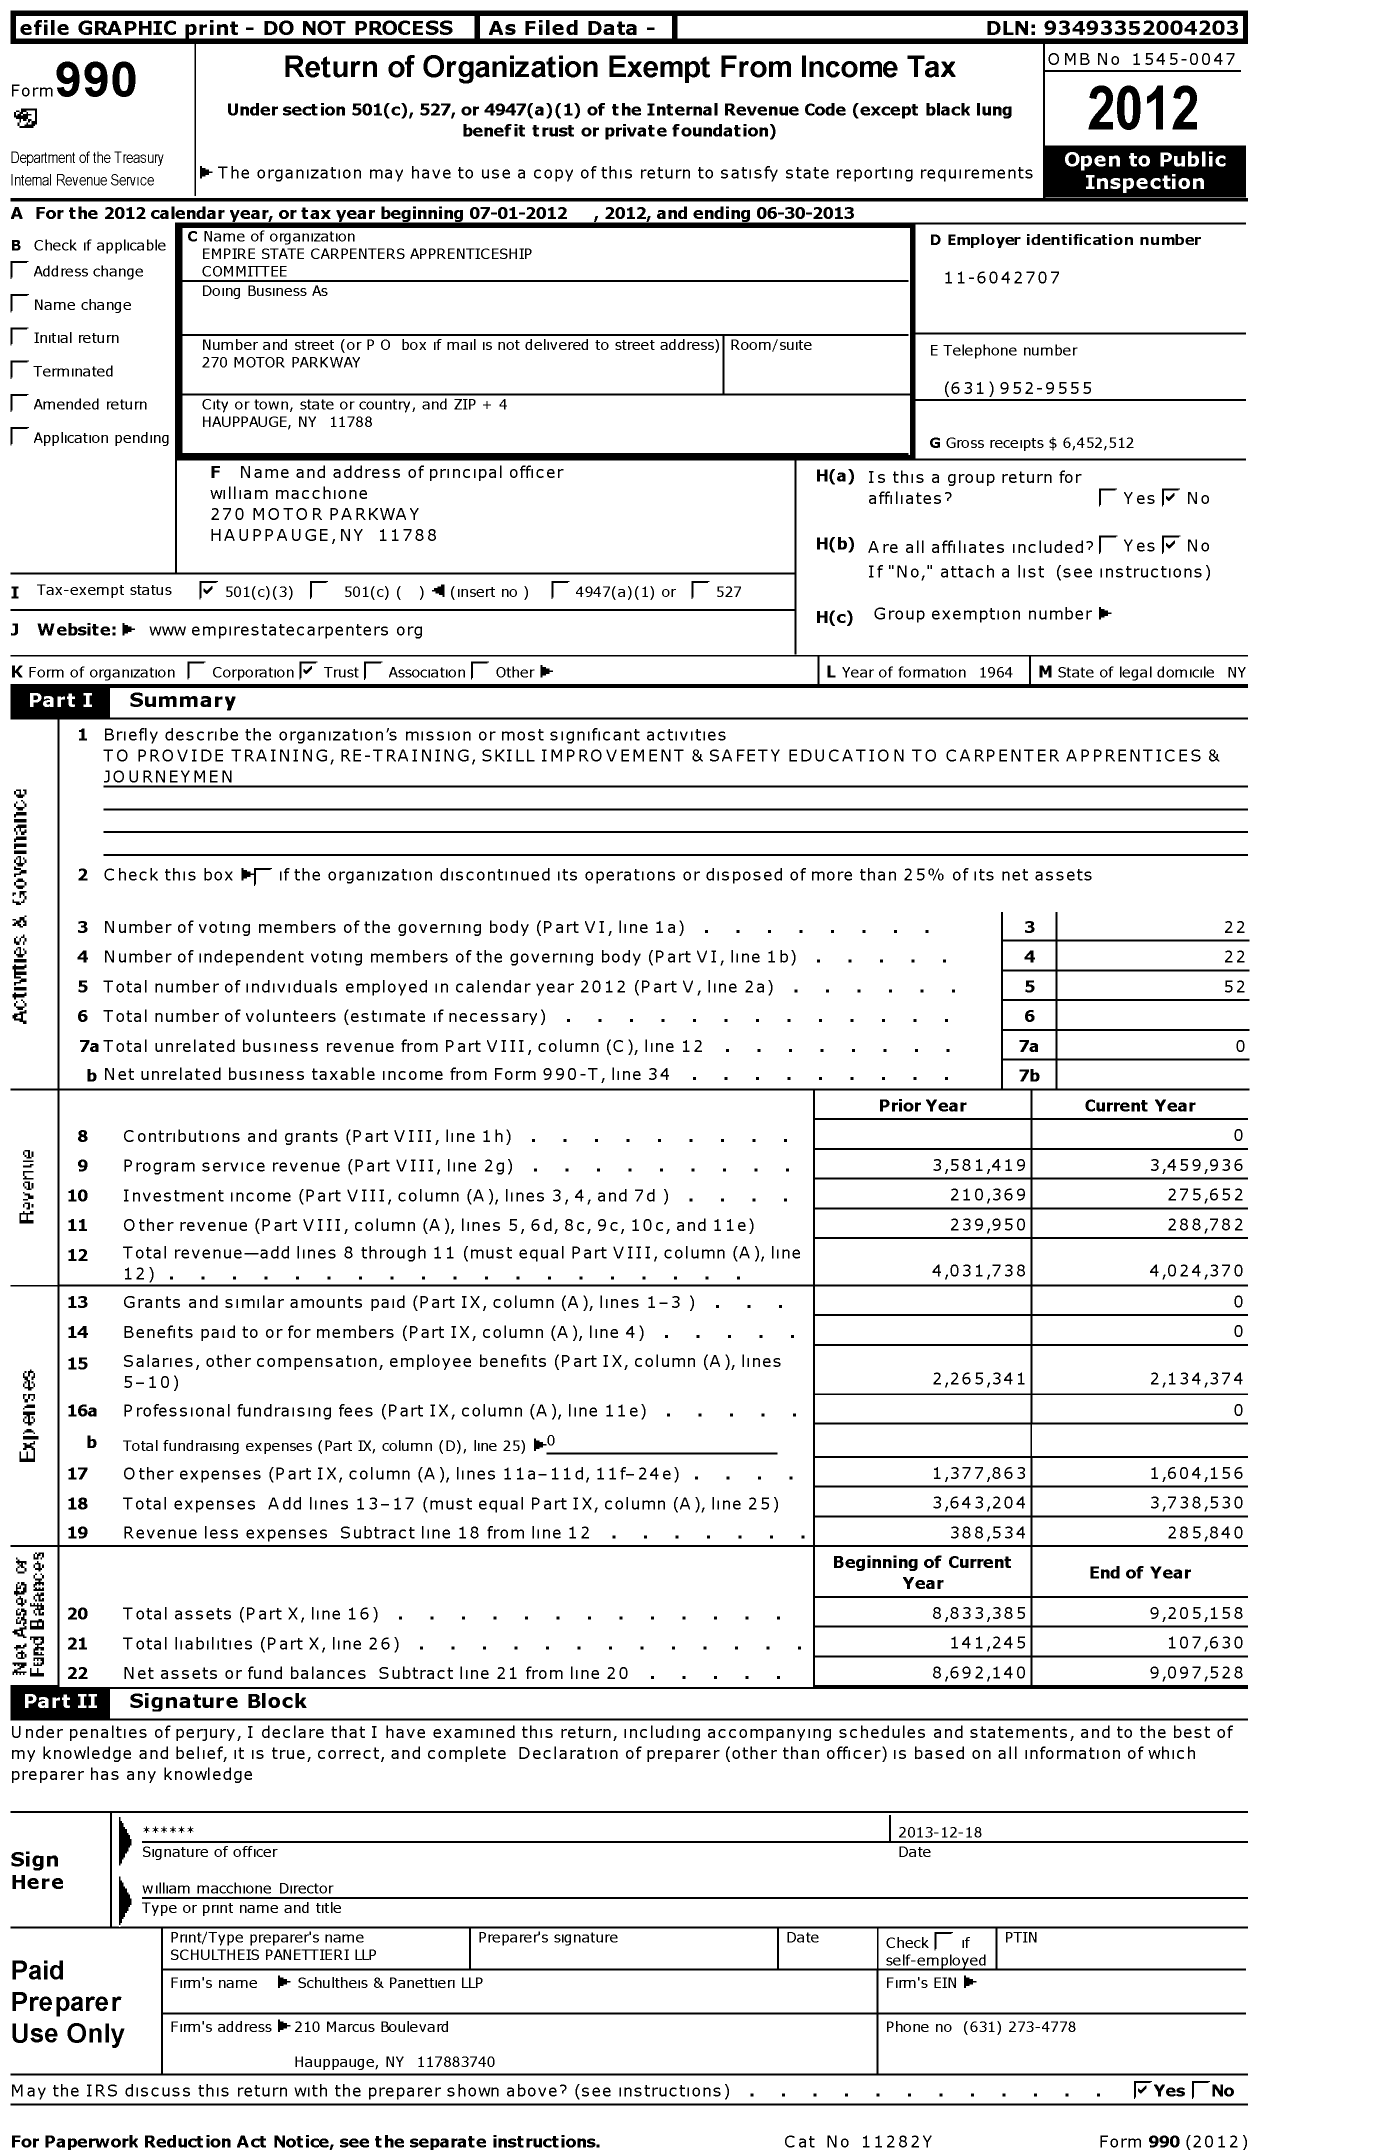 Image of first page of 2012 Form 990 for Empire State Carpenters Apprenticeship Committee